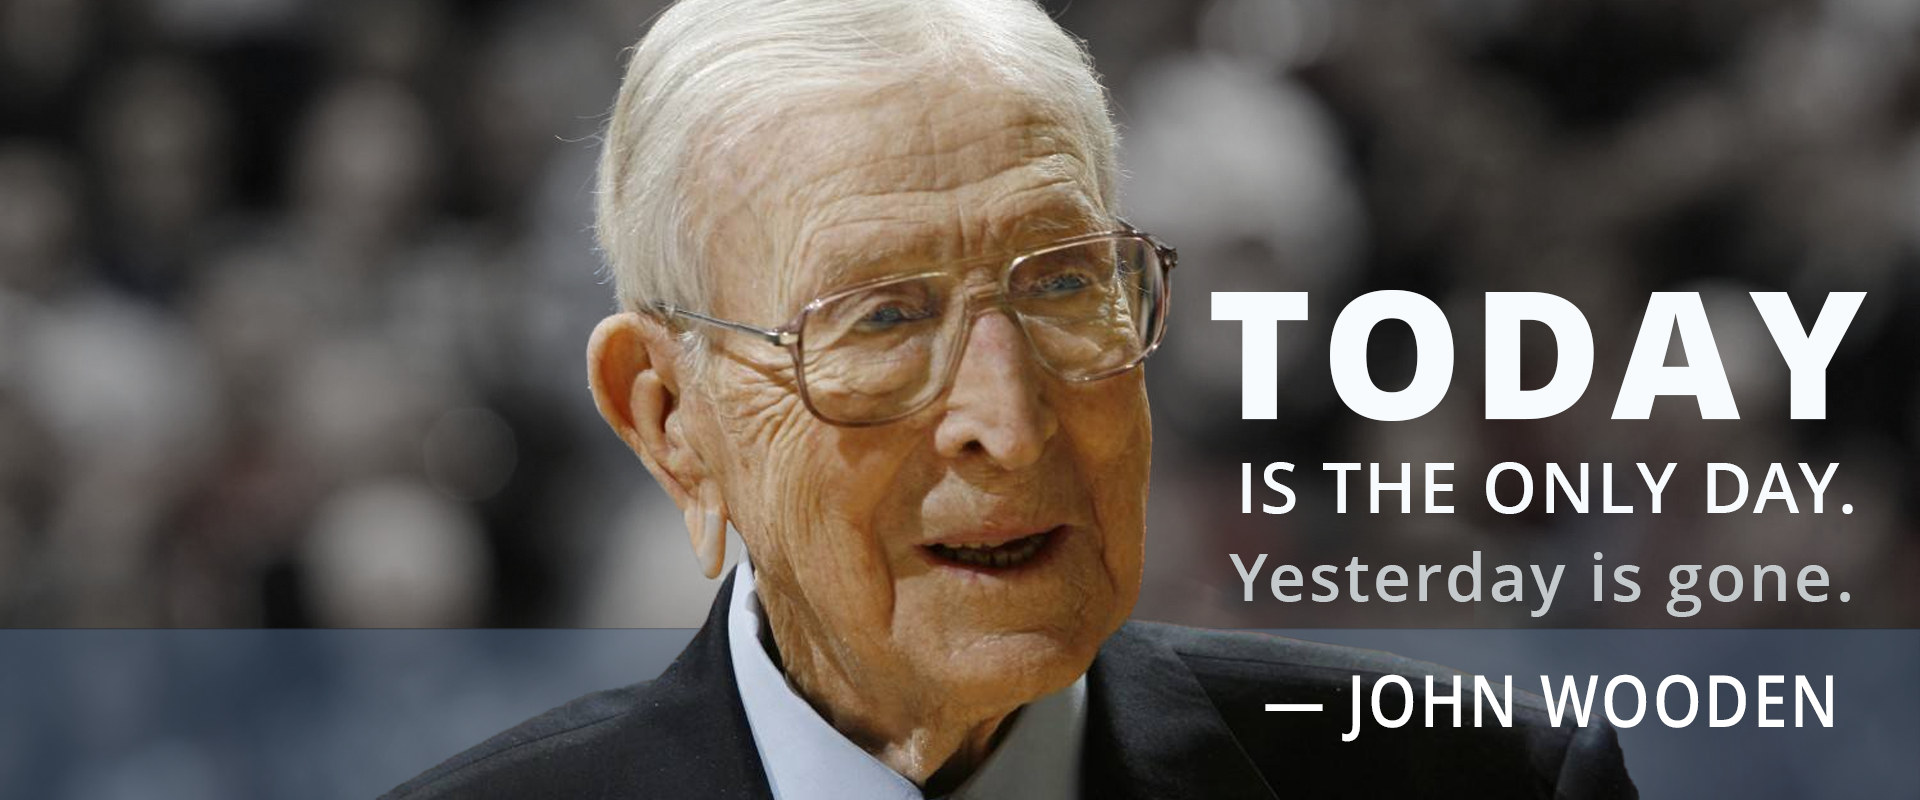 John Wooden: Today is the only day.